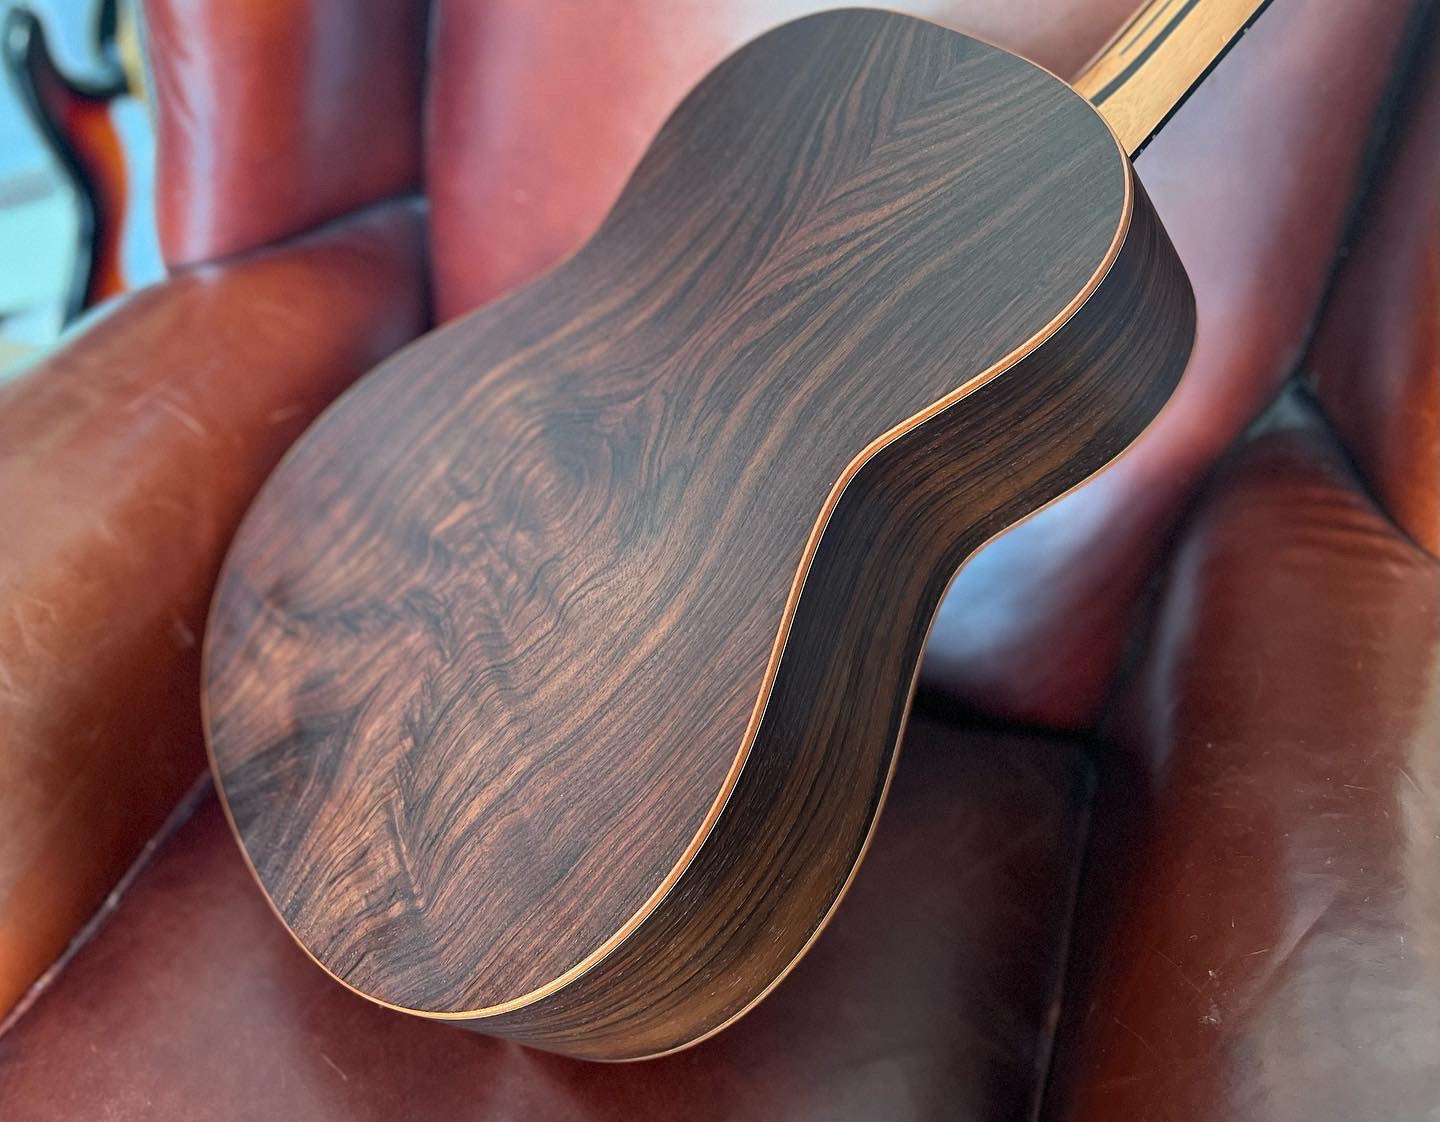 Dowina Rosewood OMG AURA Masters .  OM Body Acoustic Guitar, Acoustic Guitar for sale at Richards Guitars.